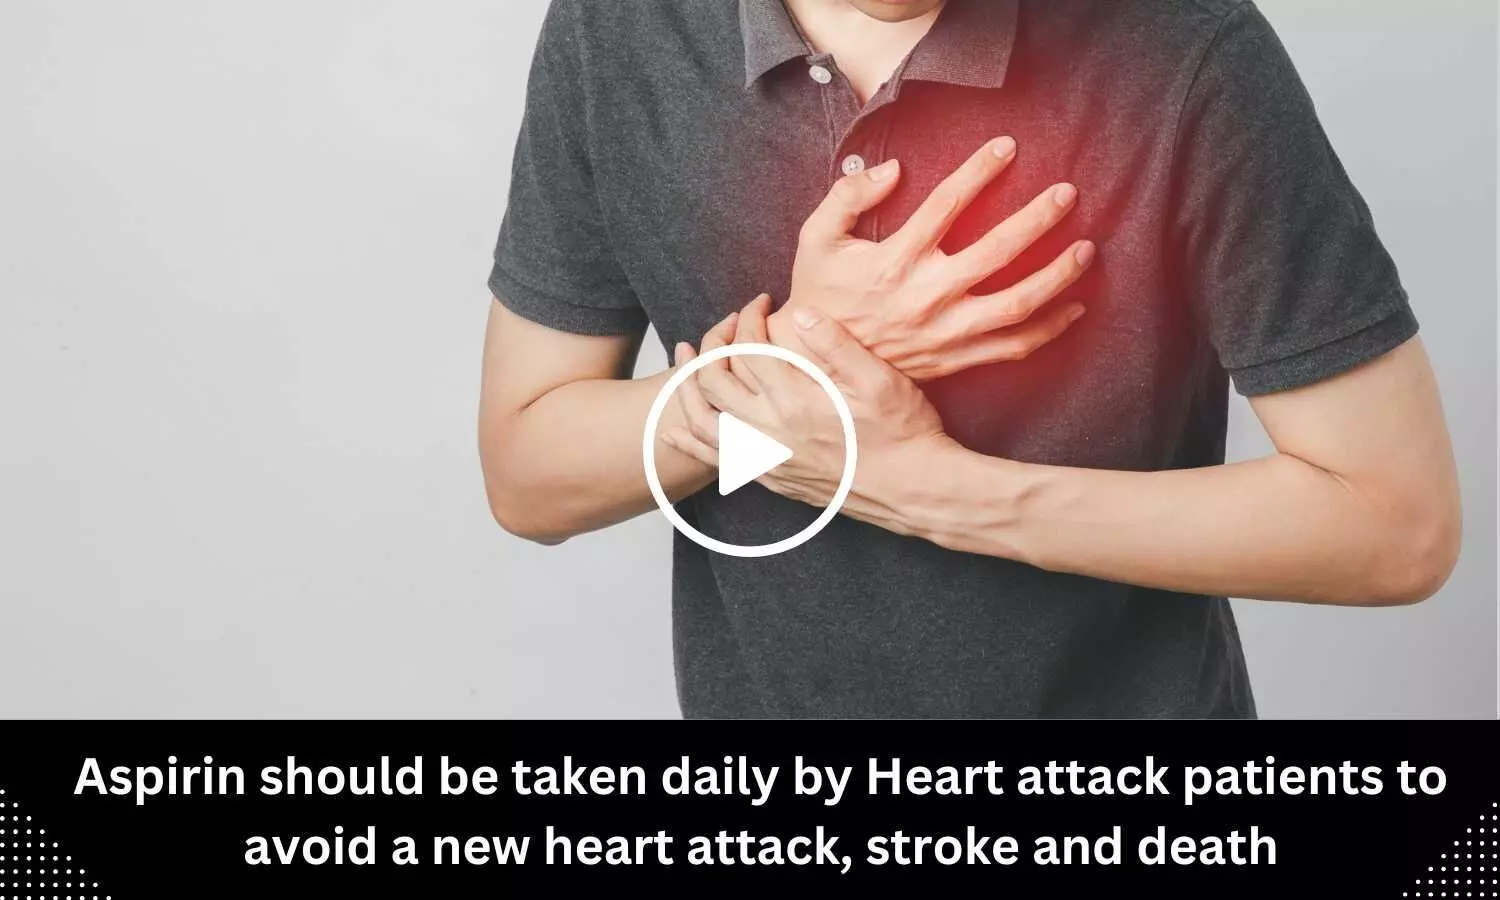 Aspirin should be taken daily by Heart attack patients to avoid a new heart attack, stroke and death